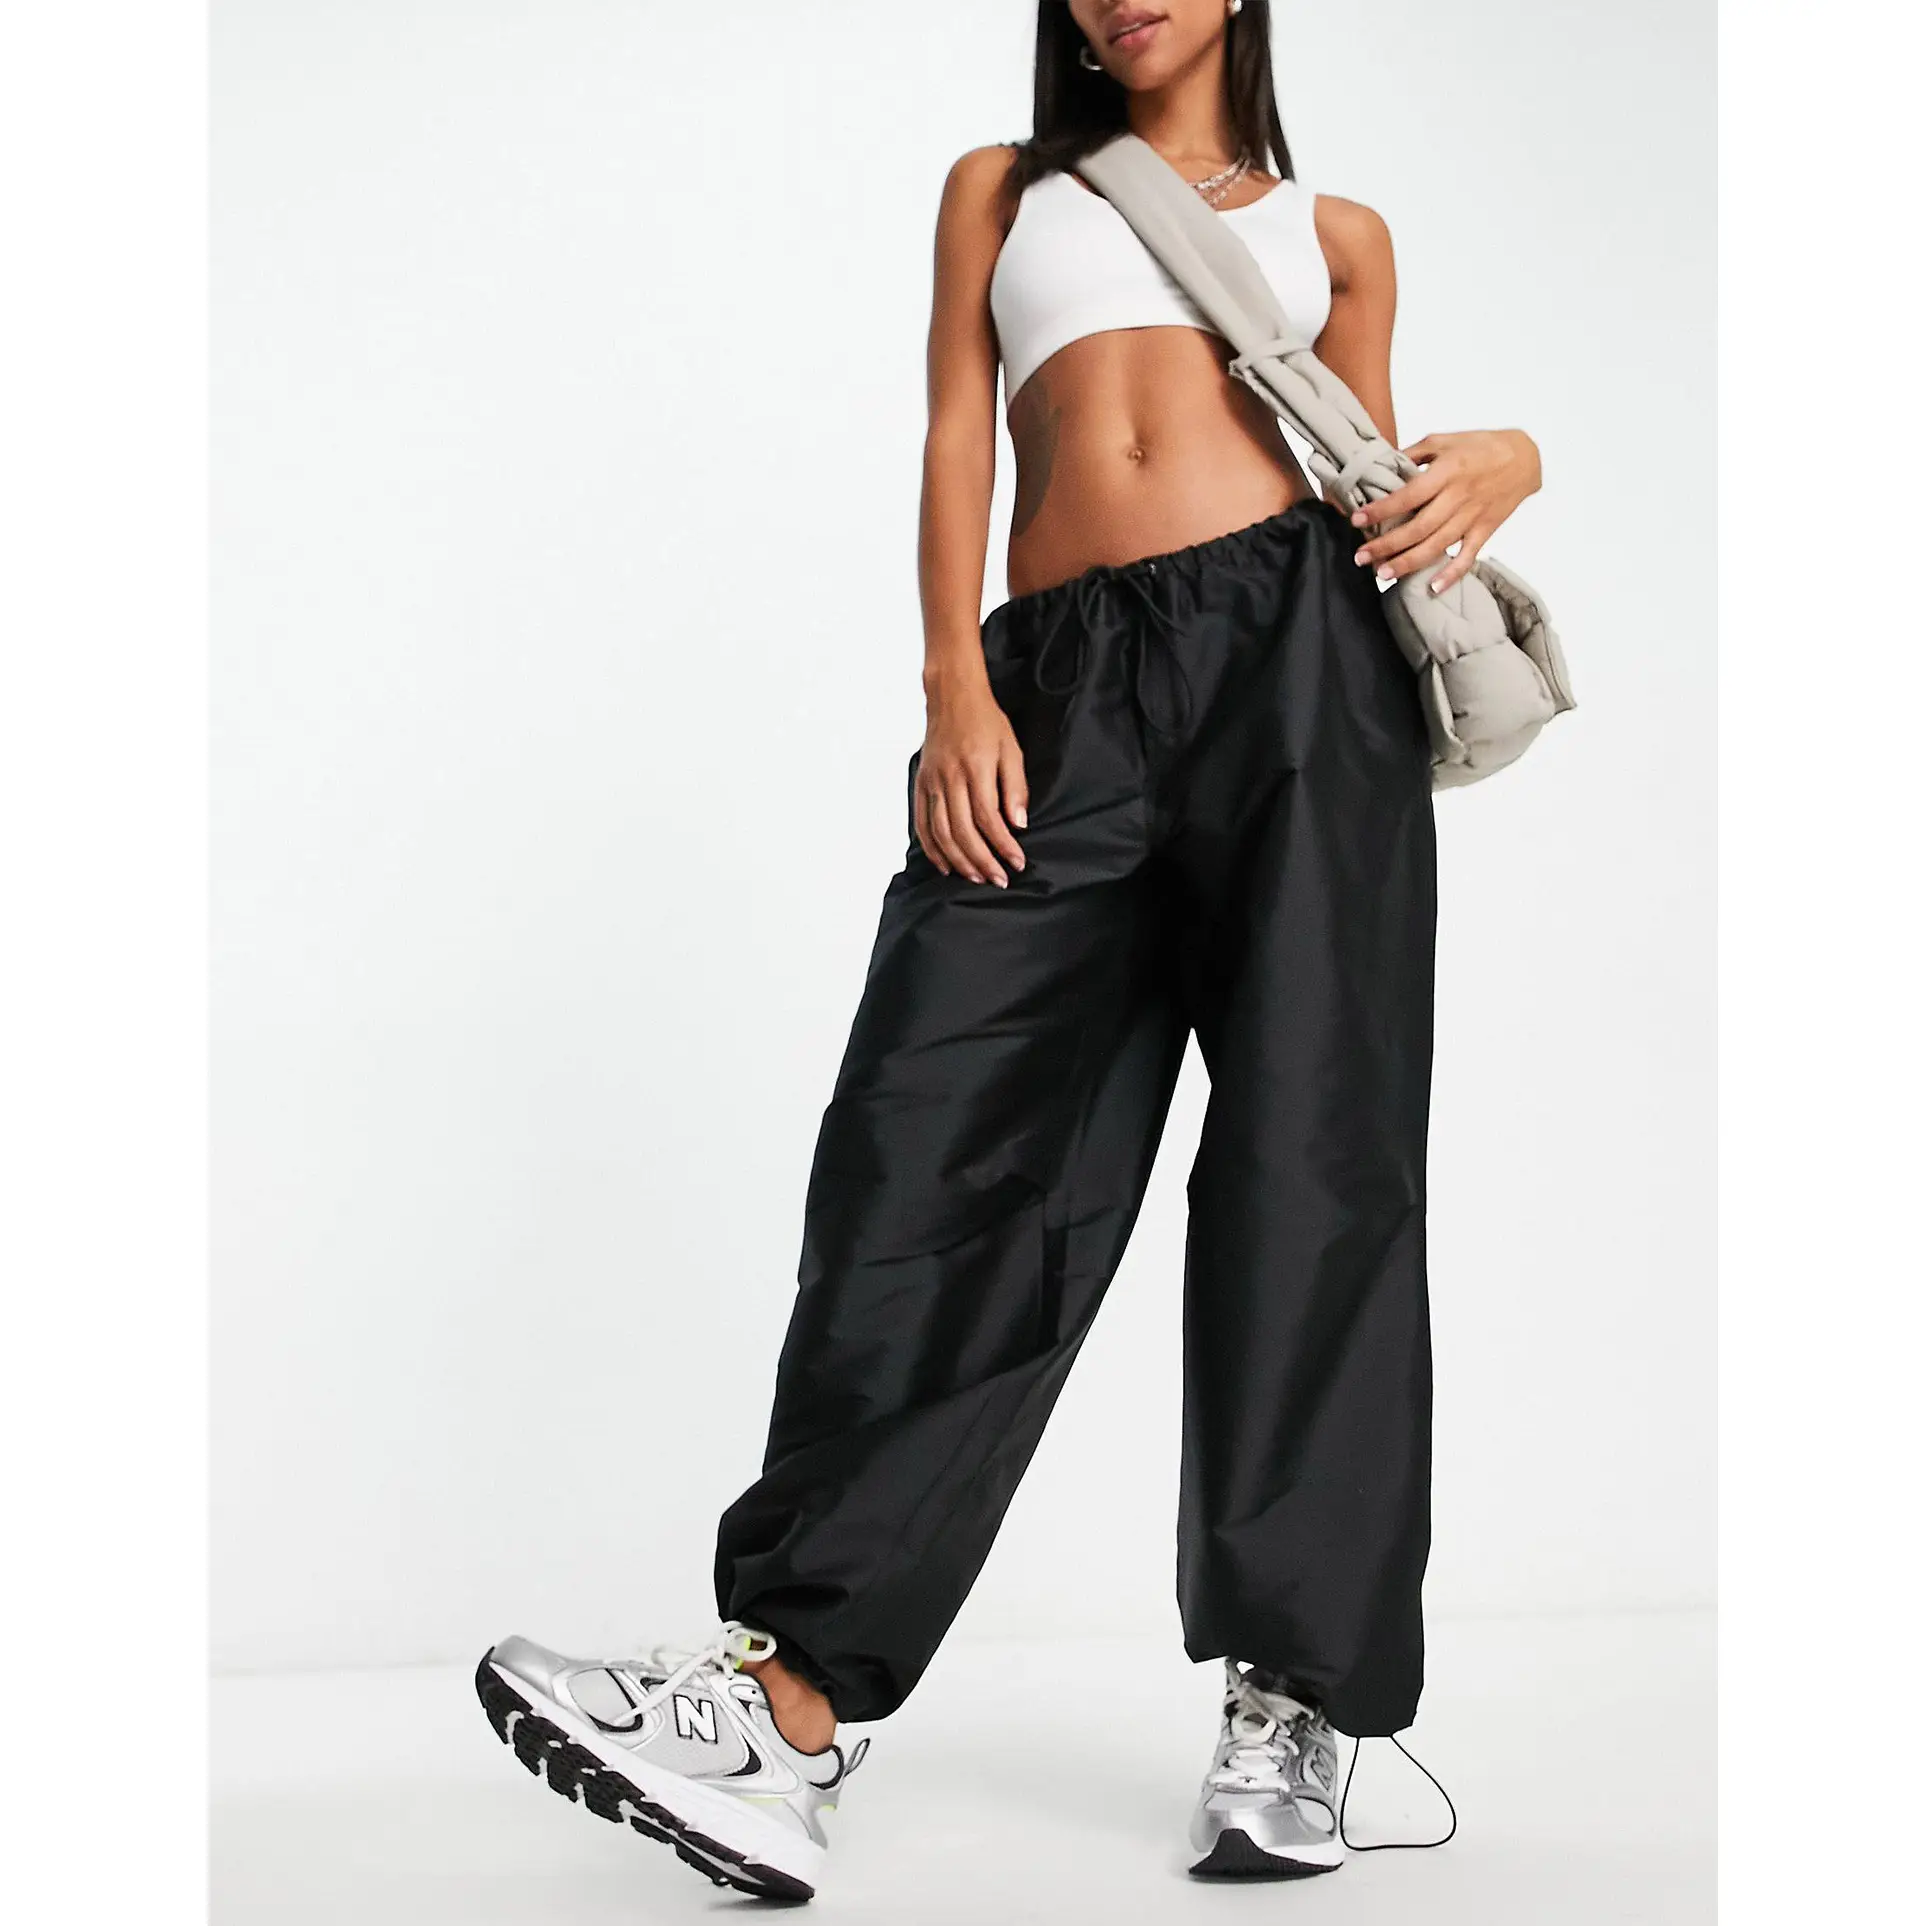 UO Luna Nylon Balloon Pant | Urban Outfitters Mexico - Clothing, Music,  Home & Accessories